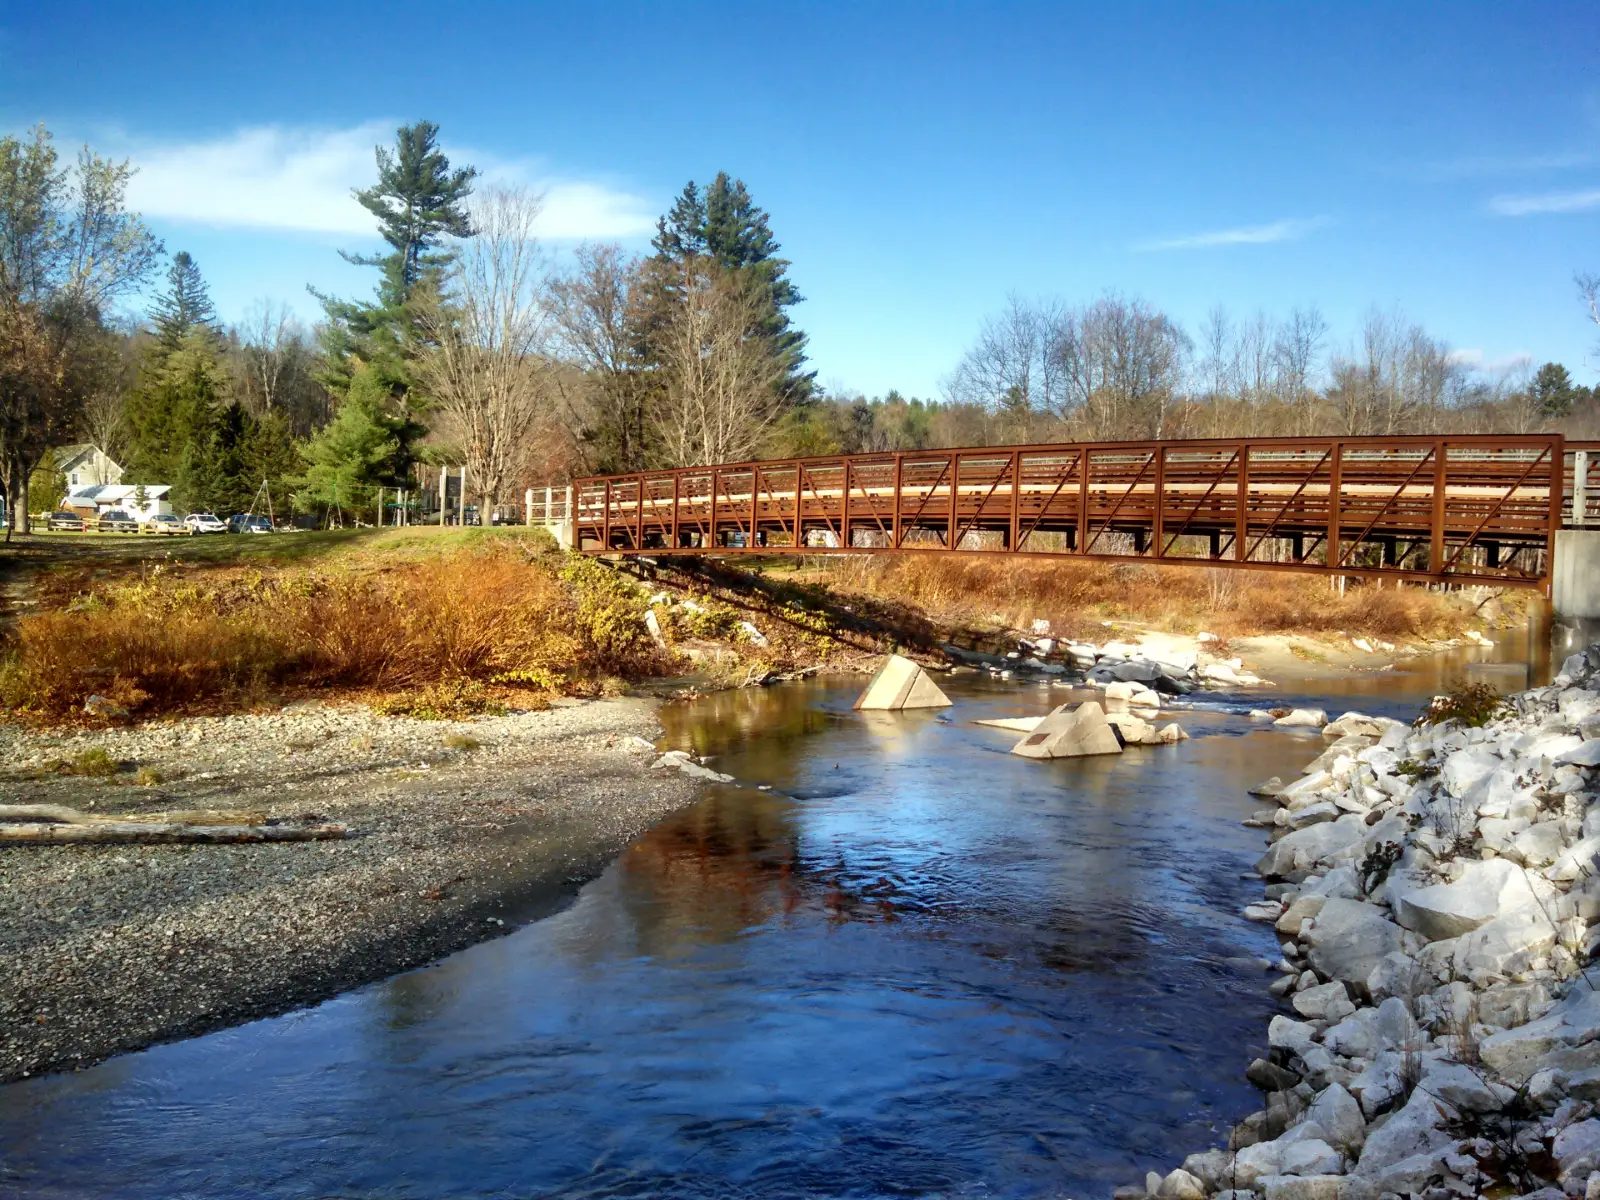 Fall day with blue skies and a brown pedestrian bridge over a river with a rocky riverbank - a small farmhouse in the background with pines and trees in the background